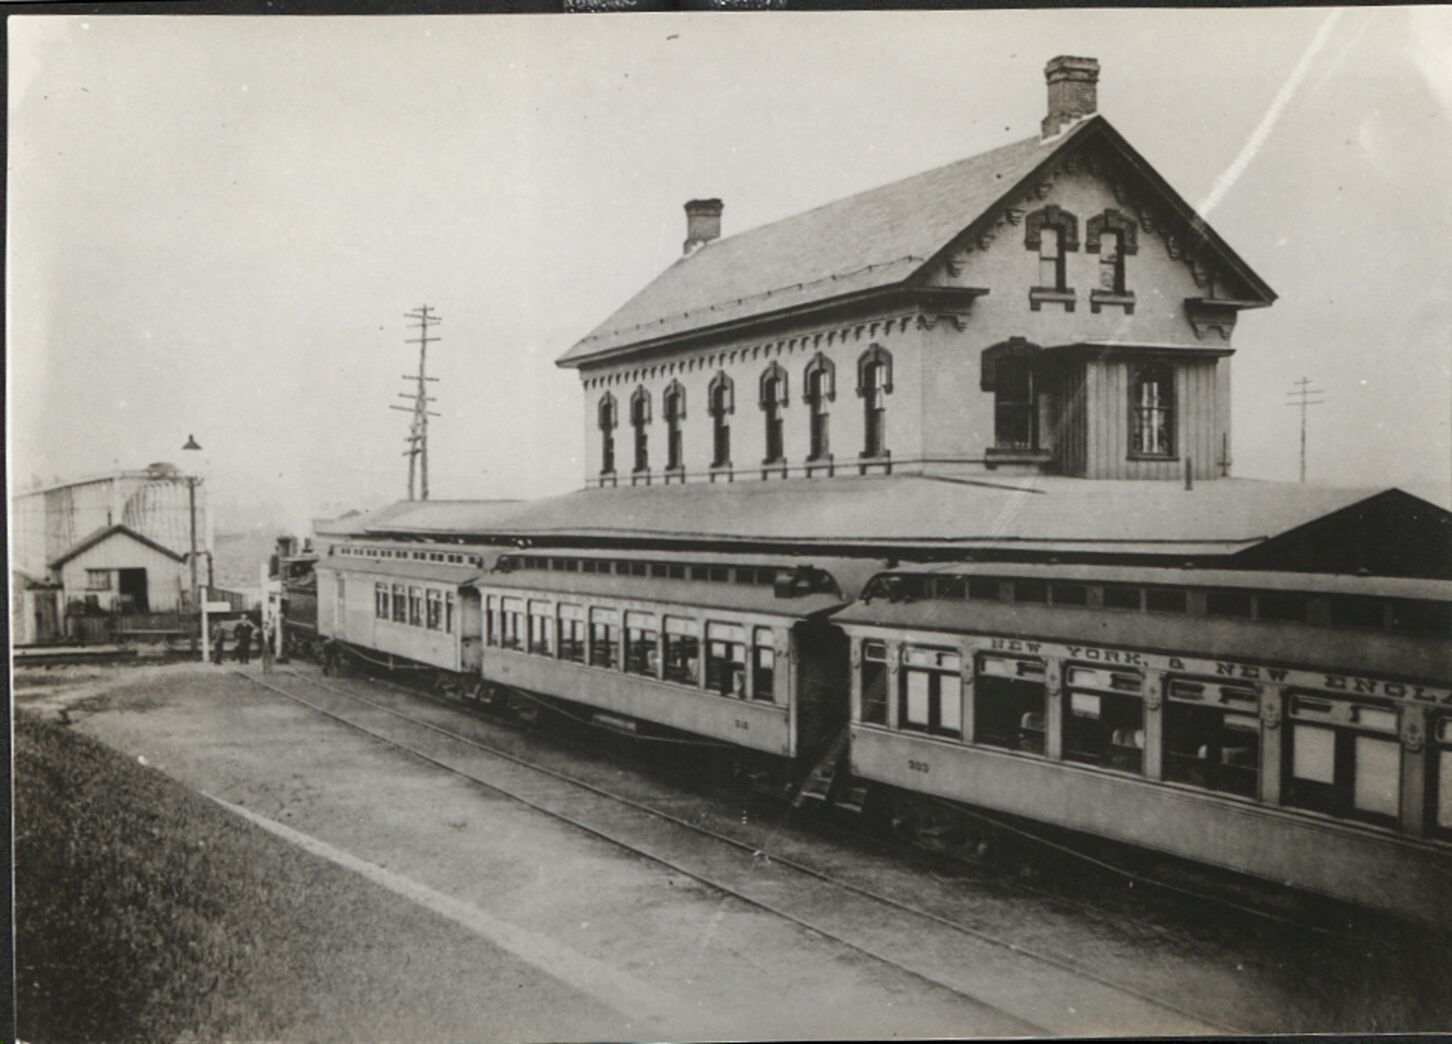 New York and New England Railroad White Train at the Middletown, Connecticut, railroad station